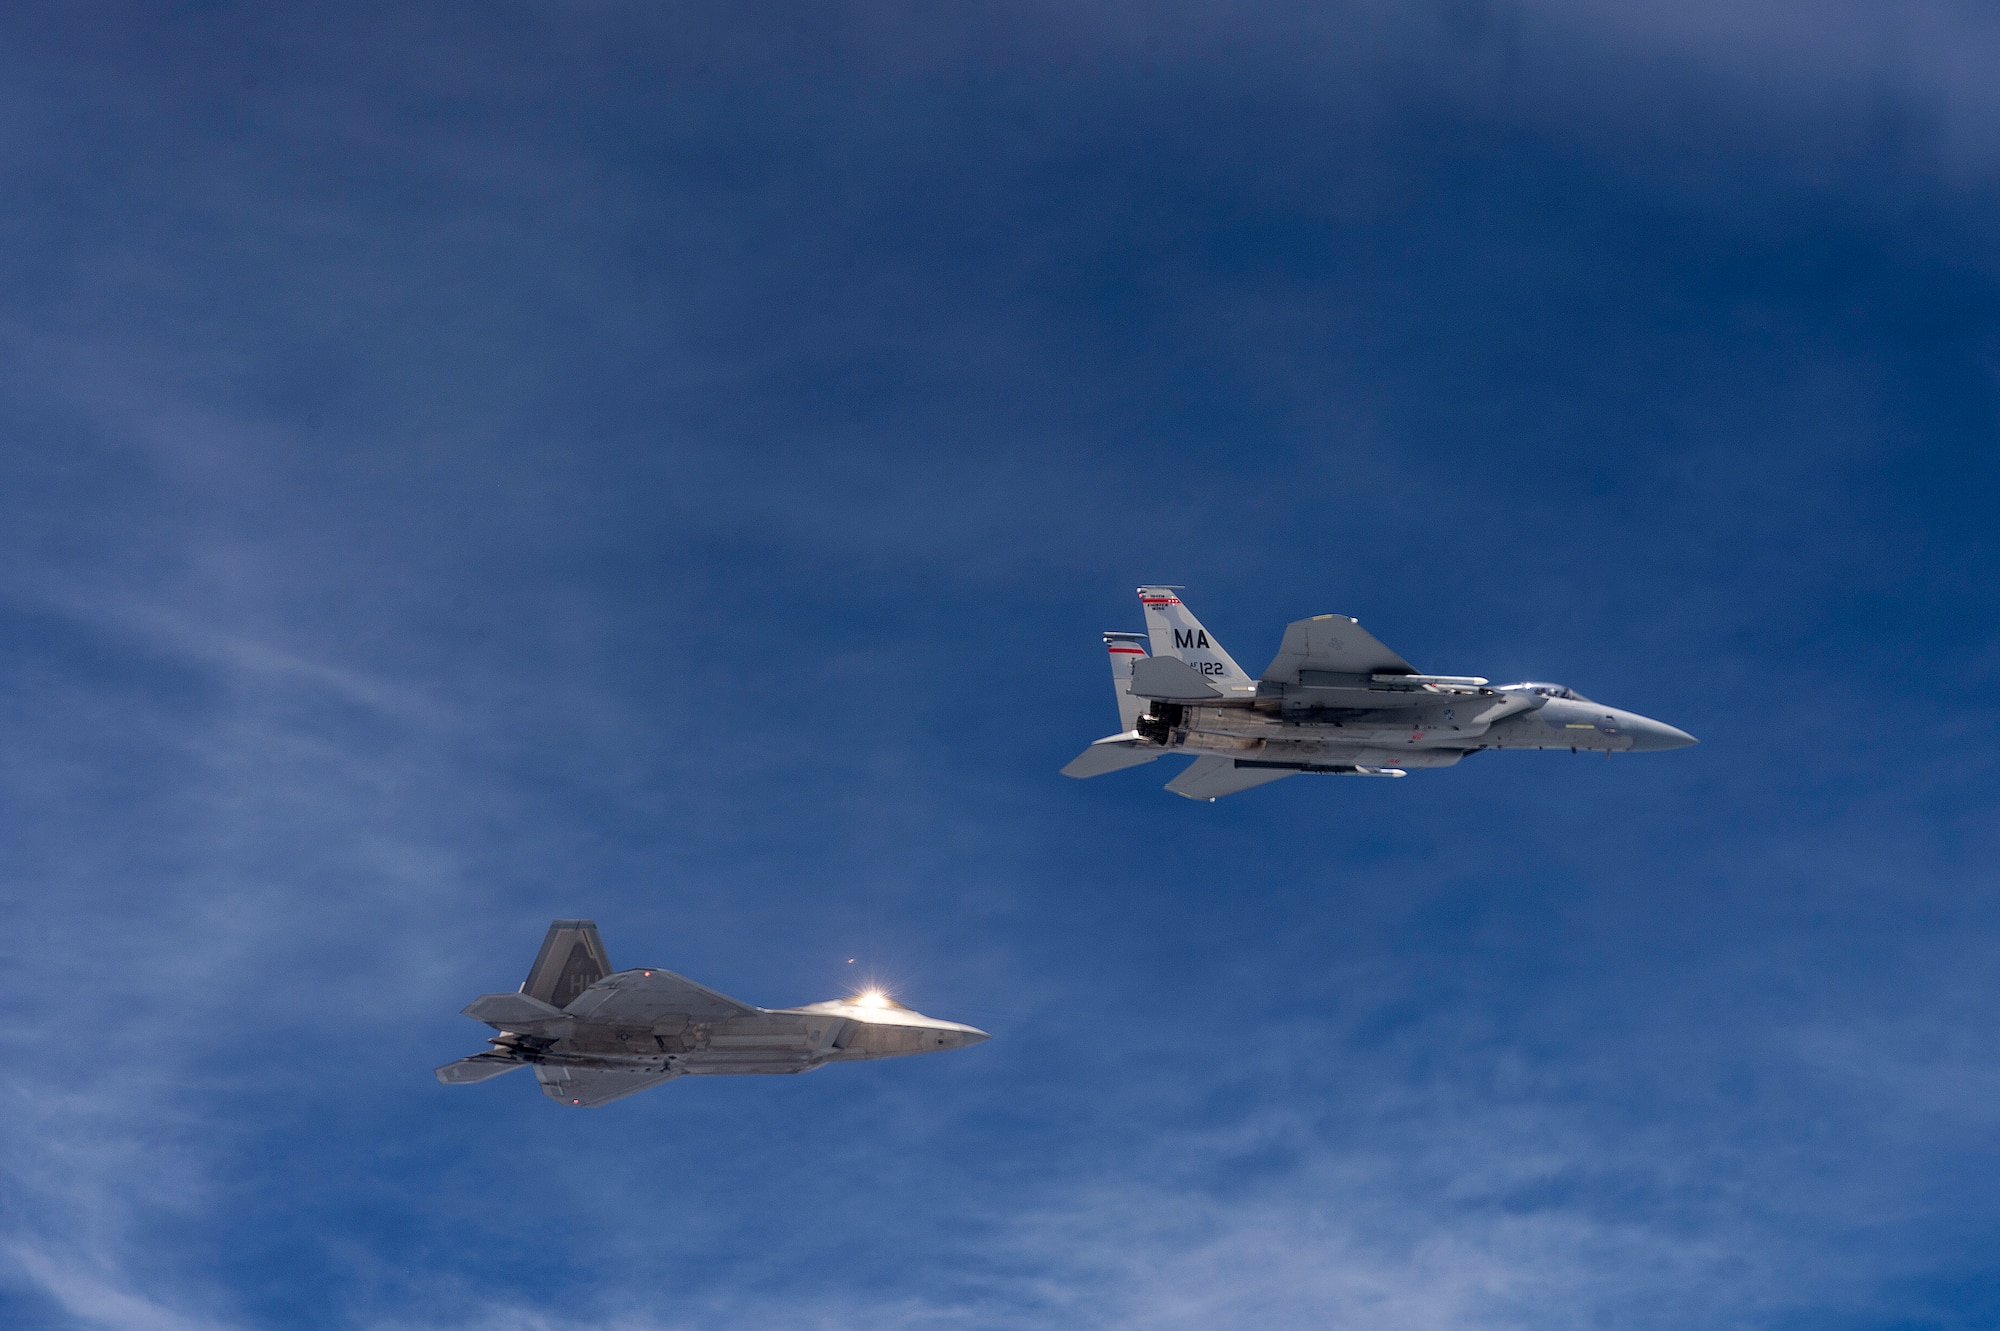 A U.S. Air Force F-22 Raptor from the 154th Wing, Joint Base Pearl Harbor-Hickam, Hawaii, and U.S. Air Force F-15 Eagle from the 131st Fighter Squadron, 104th Fighter Wing, Barnes Air National Guard Base, Mass., fly over Penang, Malaysia, during Cope Taufan 14, June 16, 2014. Cope Taufan is a biennial large force employment exercise taking place June 9 to 20 designed to improve U.S. and Malaysian combined readiness. (U.S. Air Force photo by Tech. Sgt. Jason Robertson/Released) 